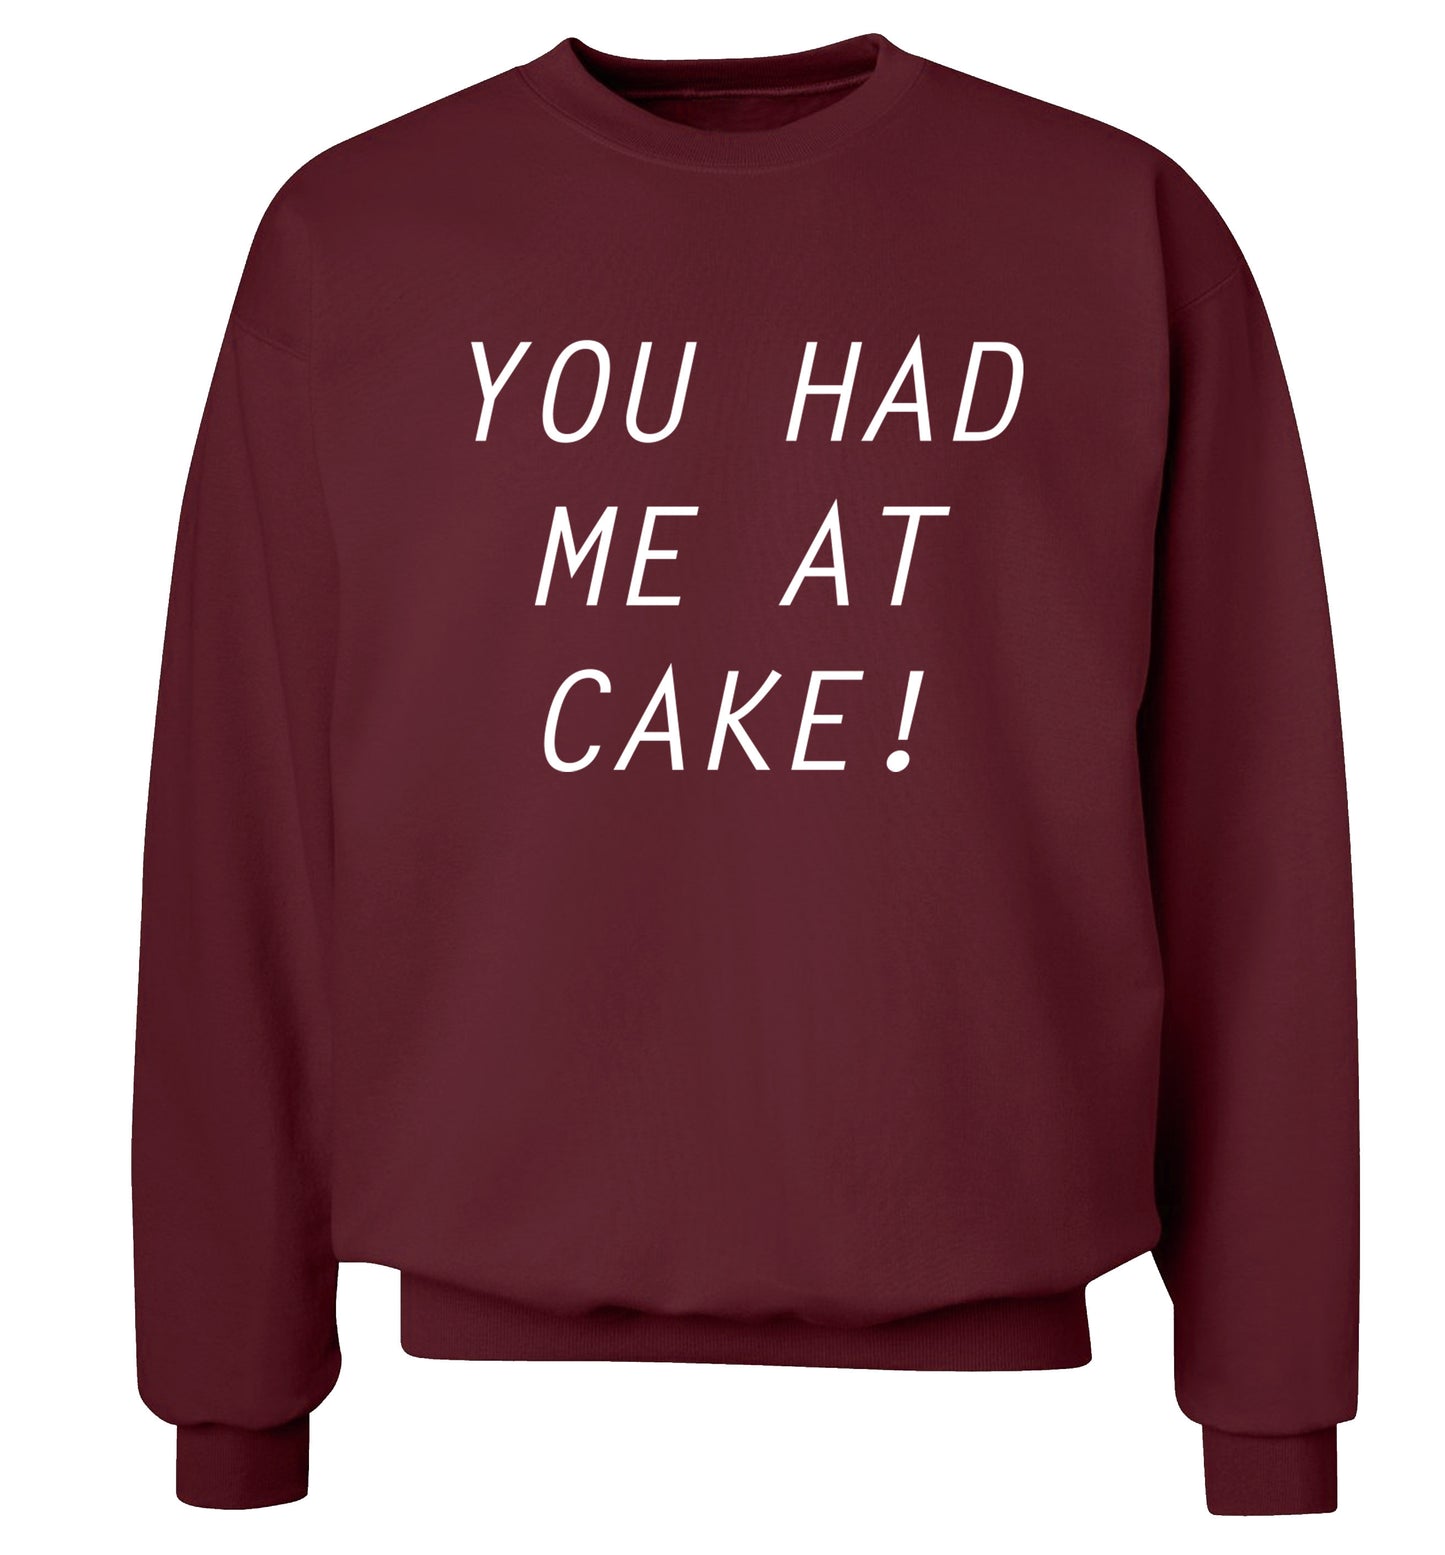 You had me at cake Adult's unisex maroon Sweater 2XL